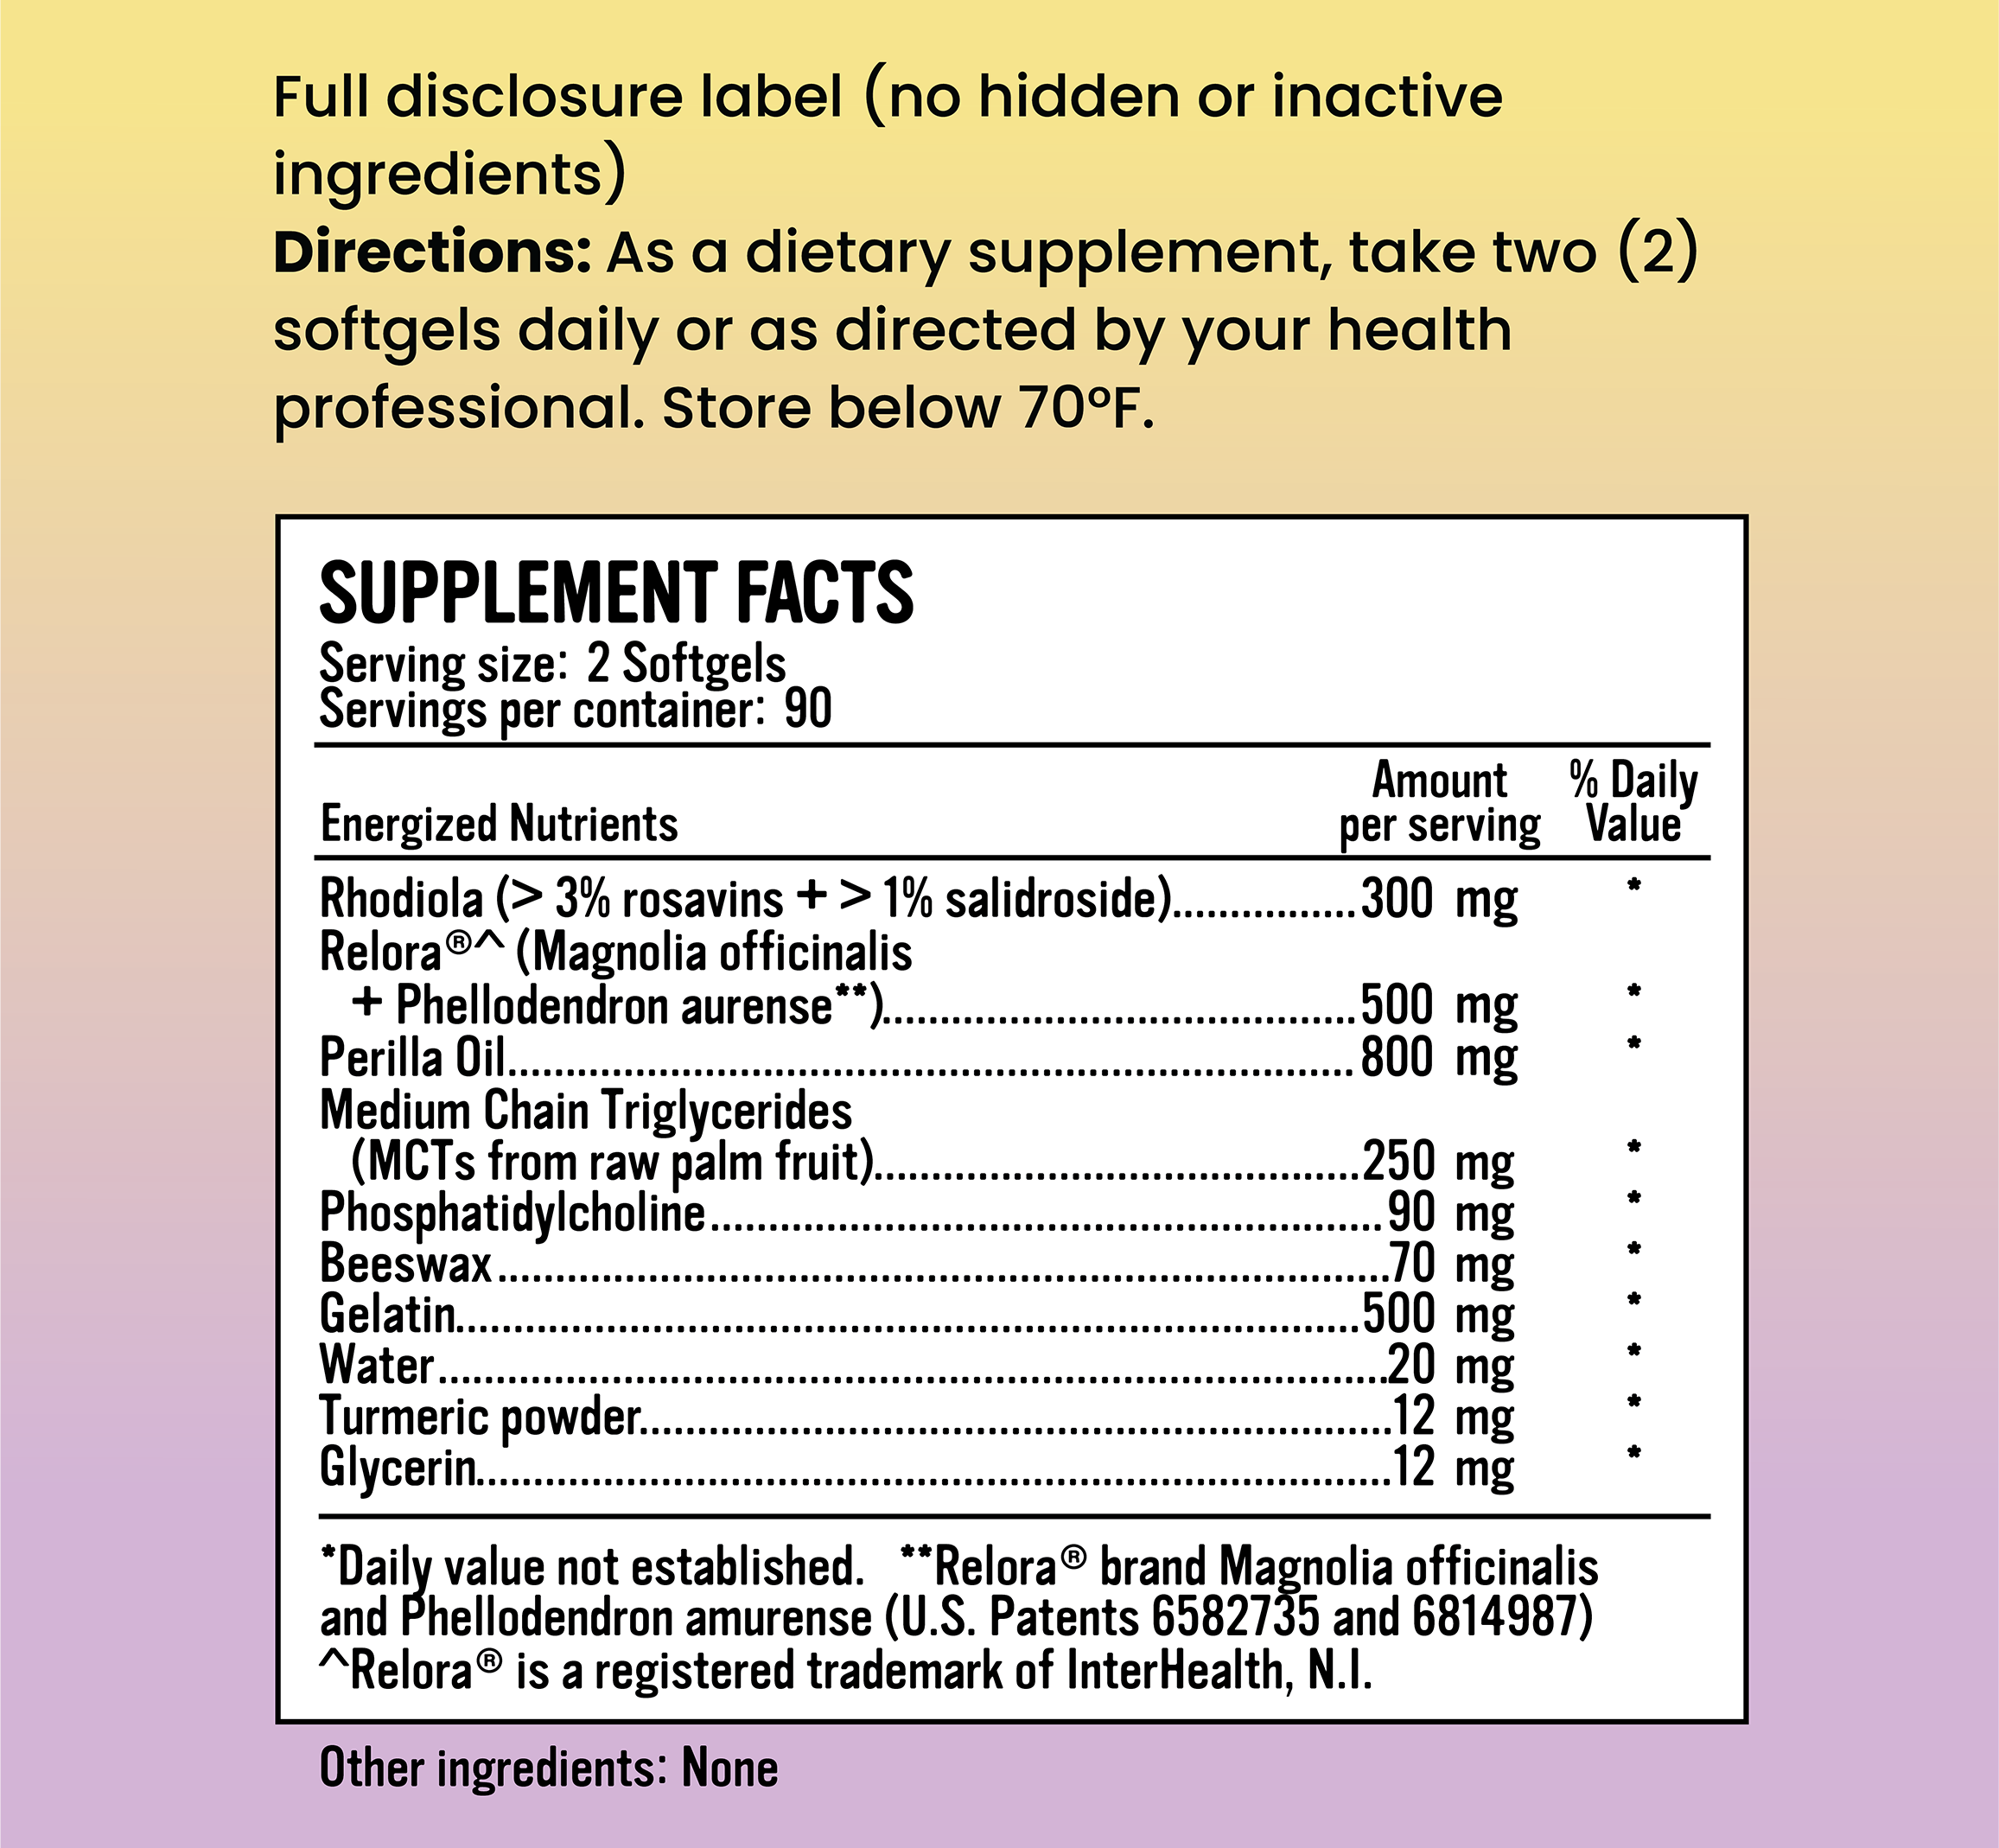 Alkaline for Life - Adaptogenic Adrenal Balance 180 - Supplement Facts.png__PID:53158b7a-6fd8-4904-ac2c-3d7af5632ac5